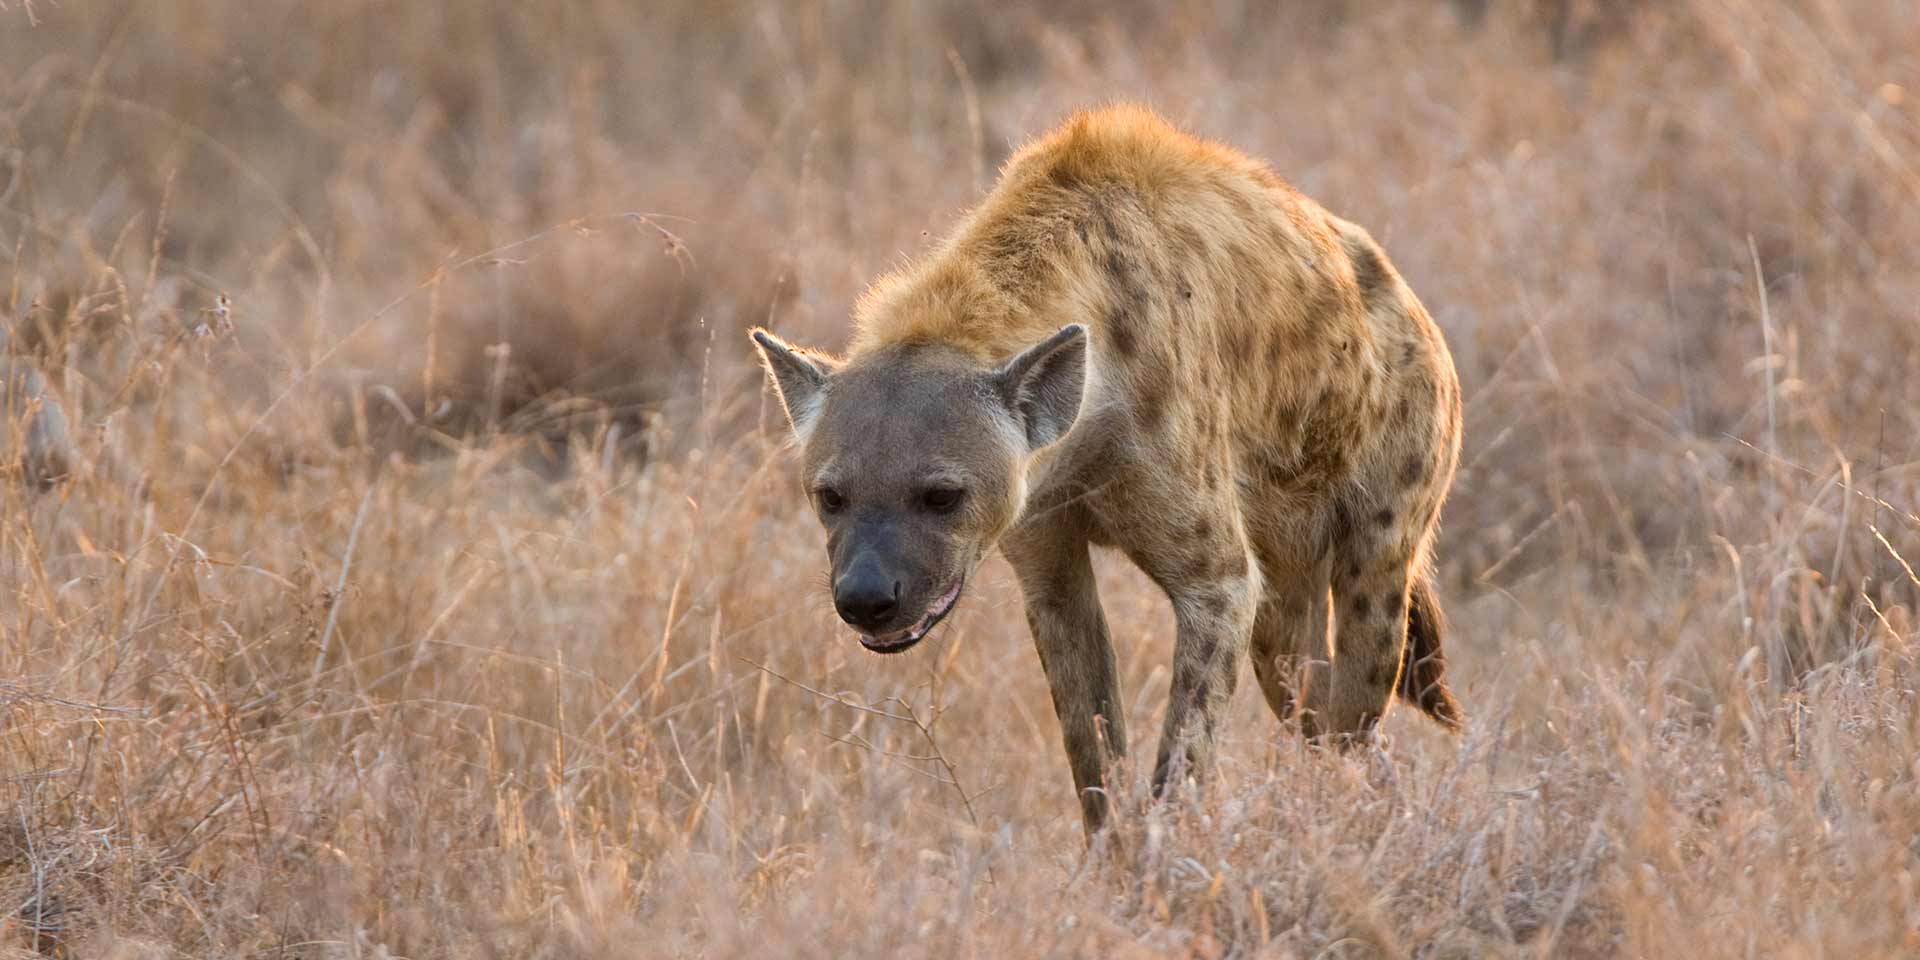 A Spotted Hyena in the wilderness at Kruger National Park - Africa